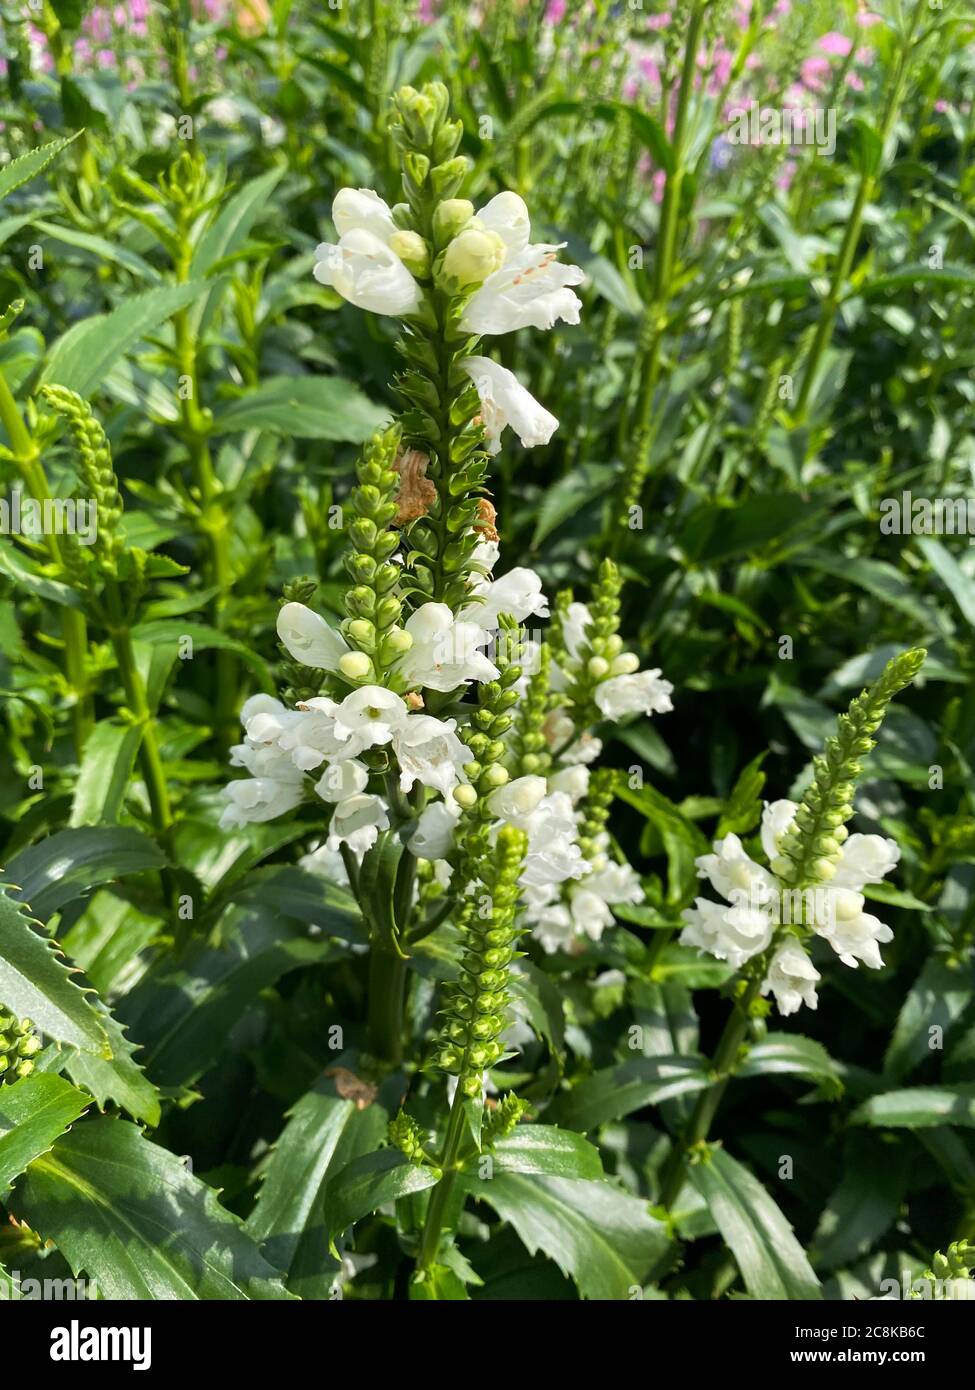 Top view closeup of isolated field with white flowers (physostegia virginiana) with green leaves Stock Photo